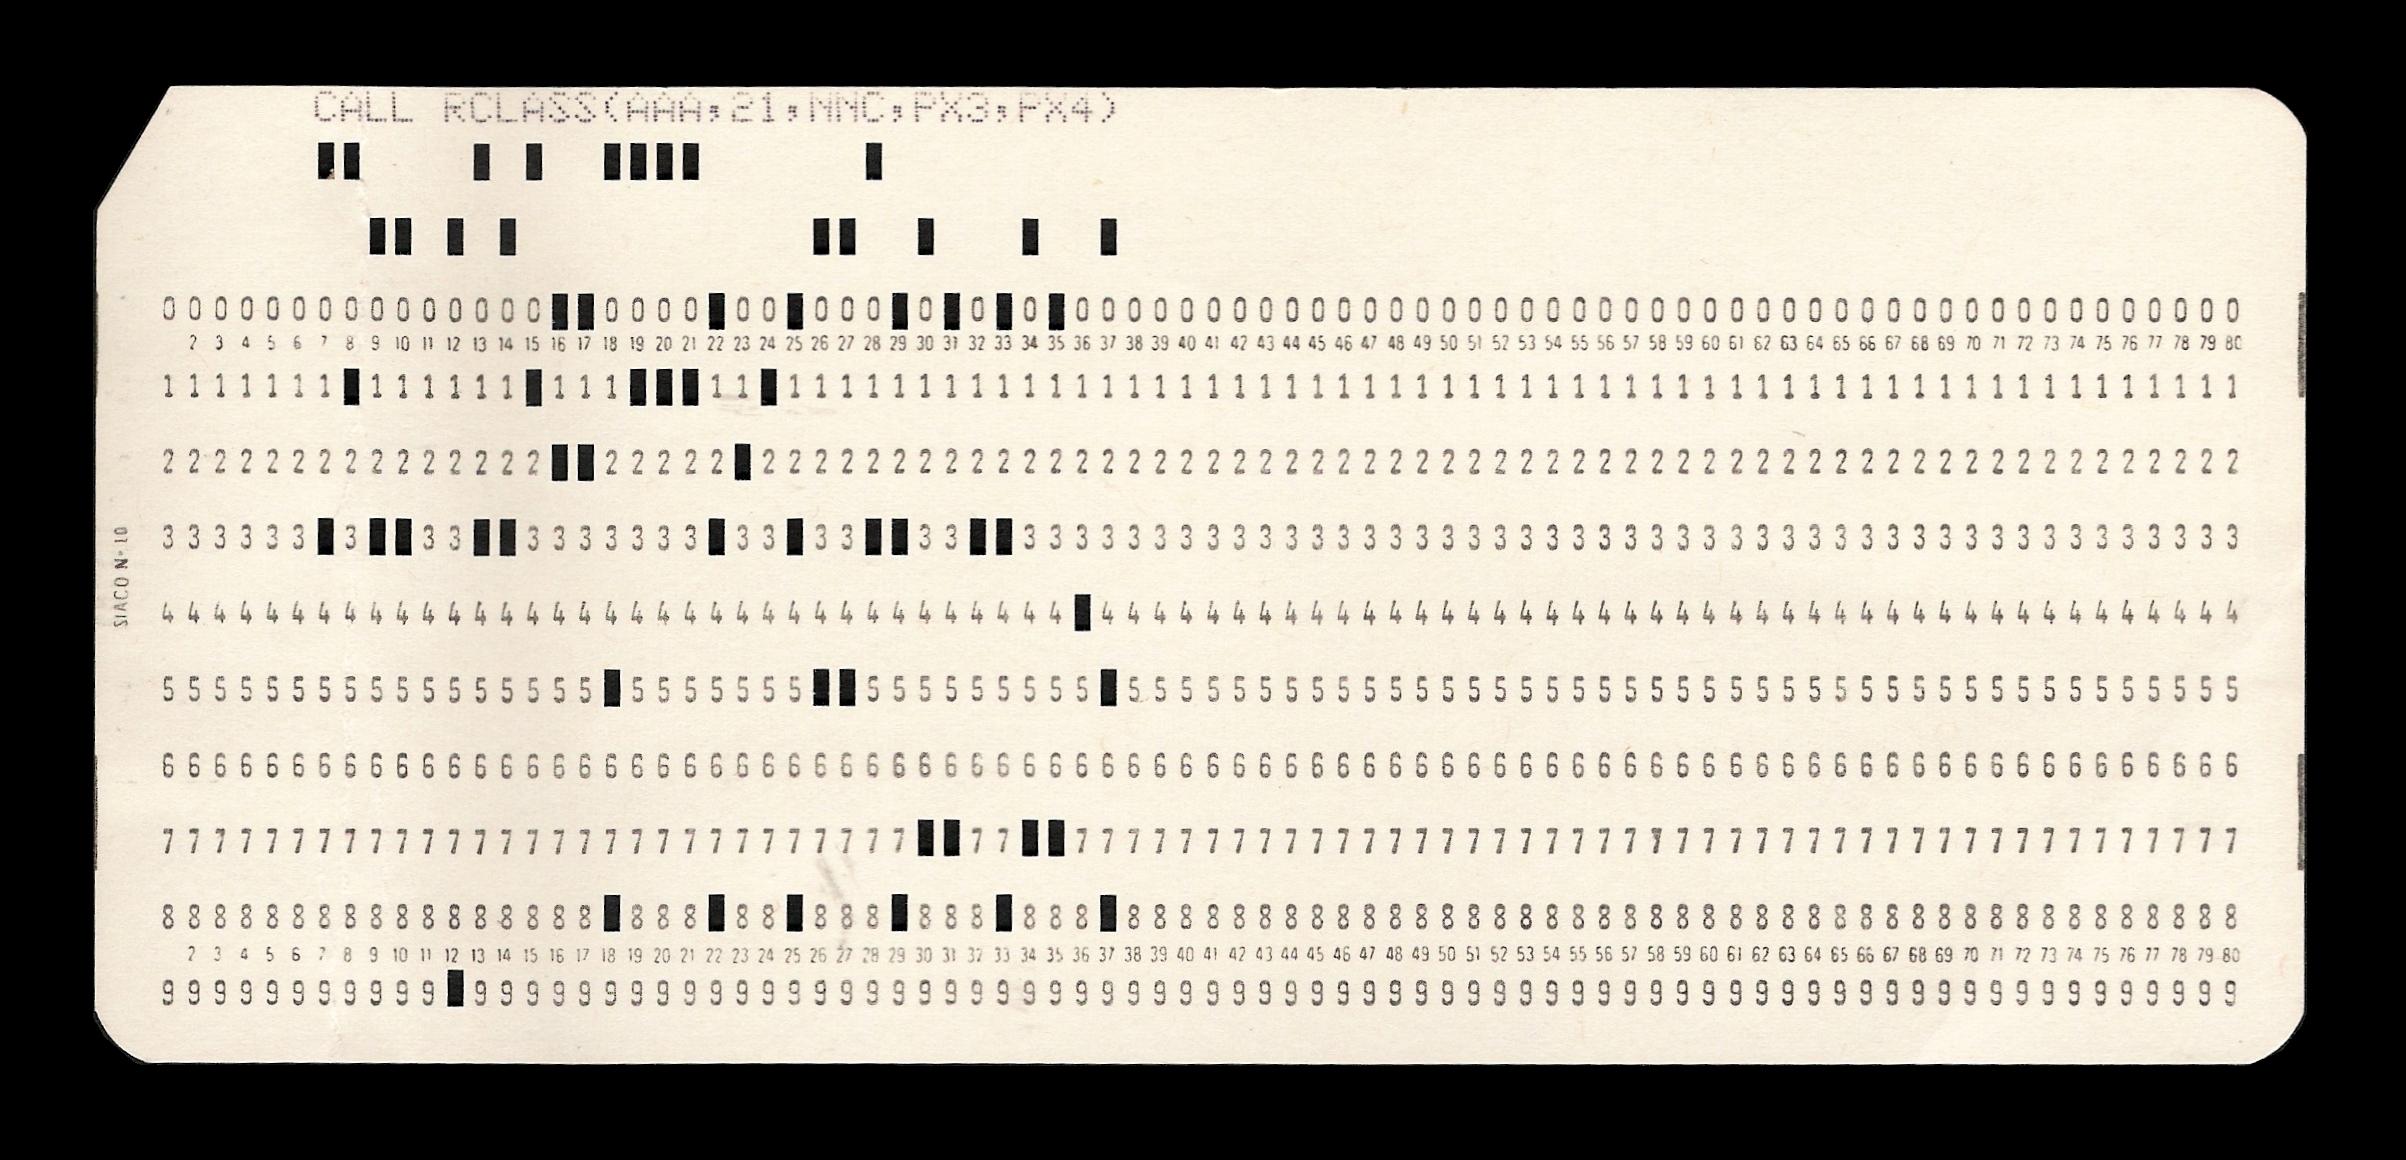 http://fr.academic.ru/pictures/frwiki/80/Punched_card.jpg